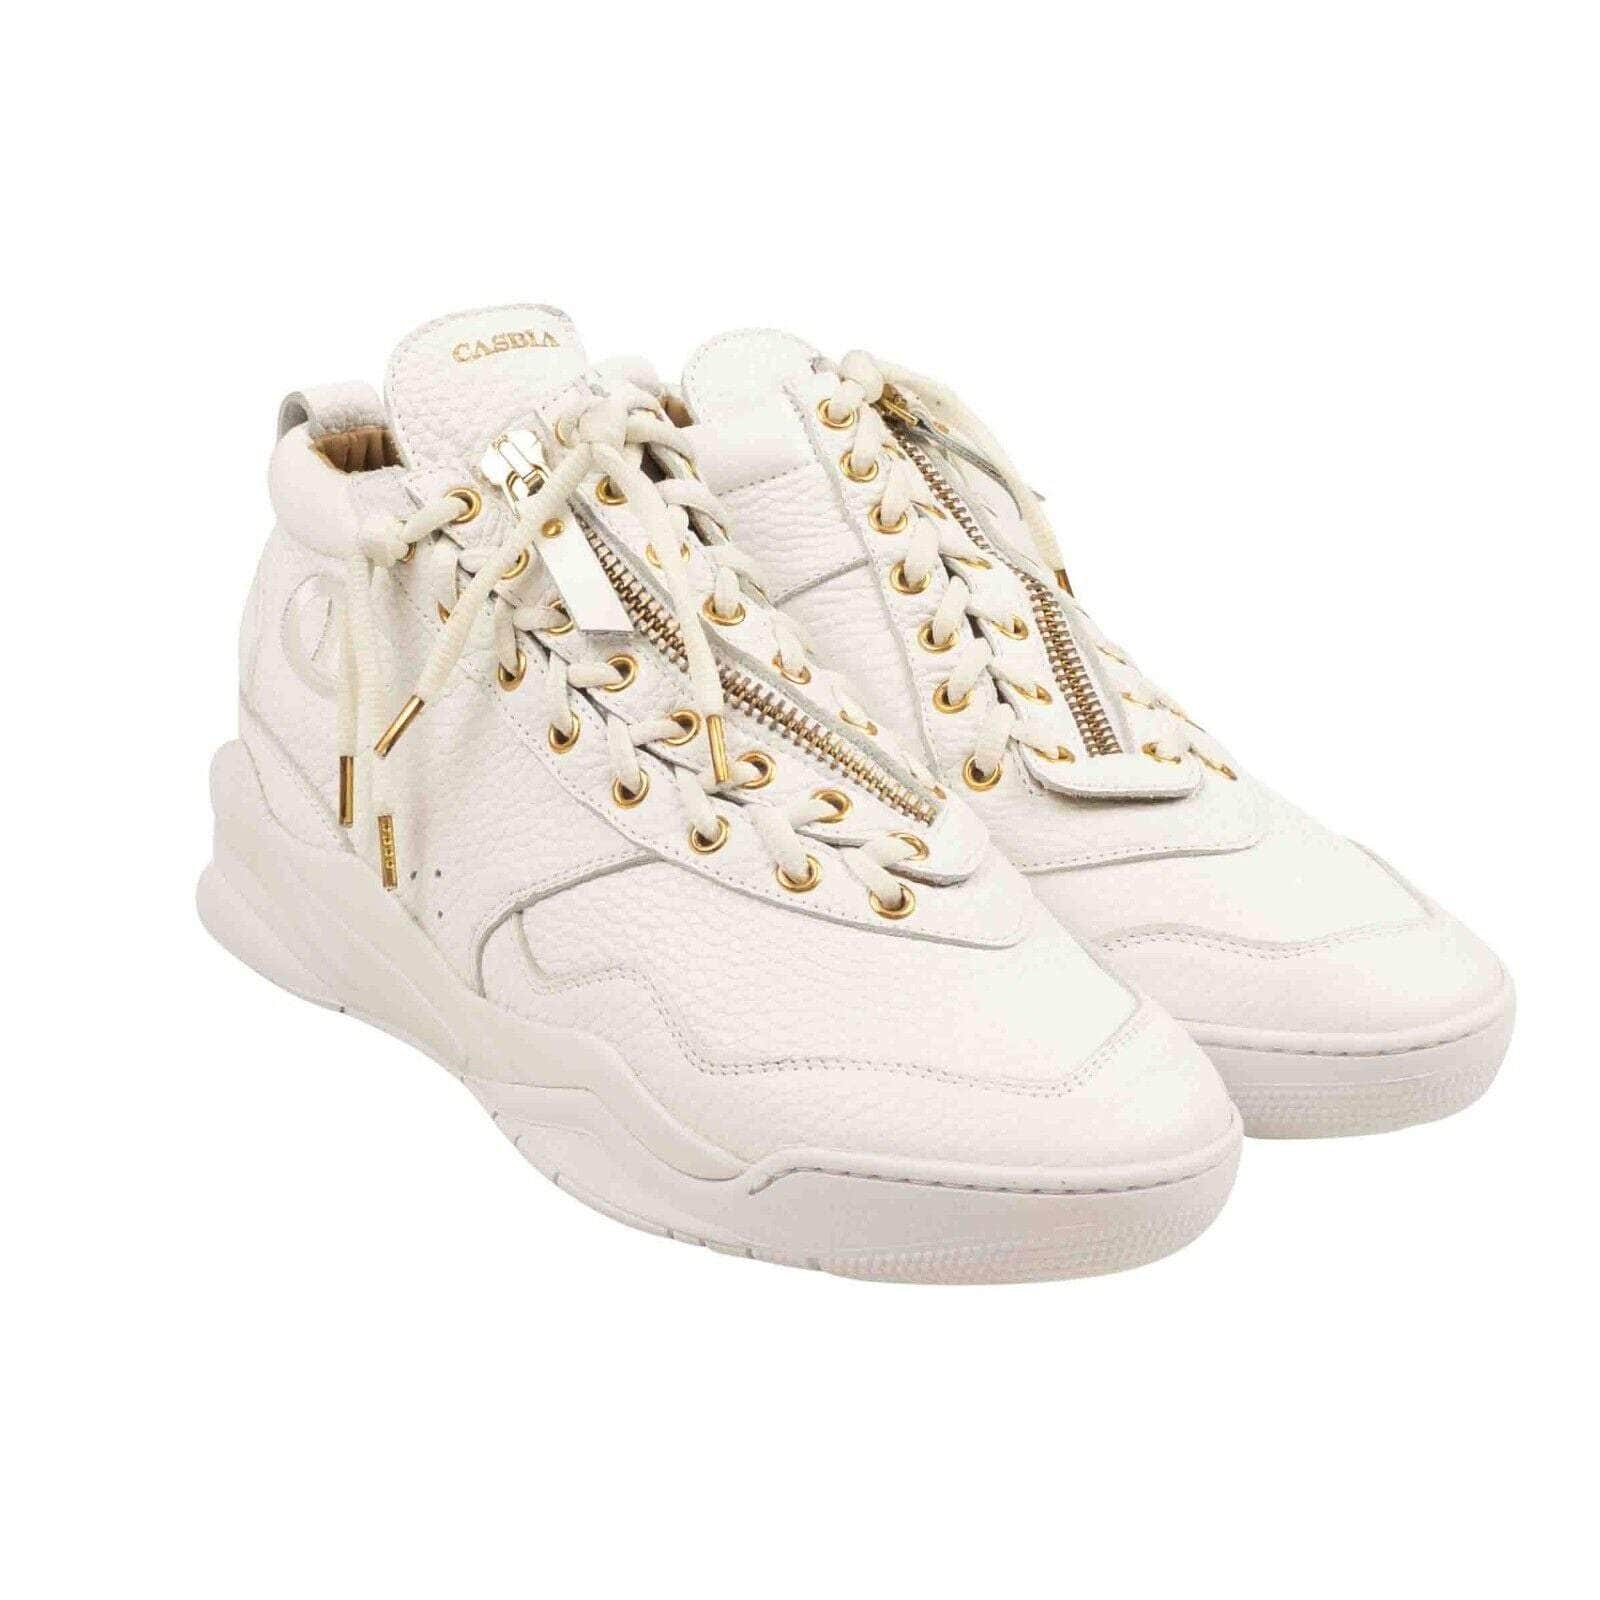 Casbia casbia, channelenable-all, chicmi, couponcollection, gender-mens, main-shoes, mens-shoes, MixedApparel, size-43, size-46, under-250 43 White AWOL Atlanta Lace Up Sneakers 95-CSA-2002/43 95-CSA-2002/43